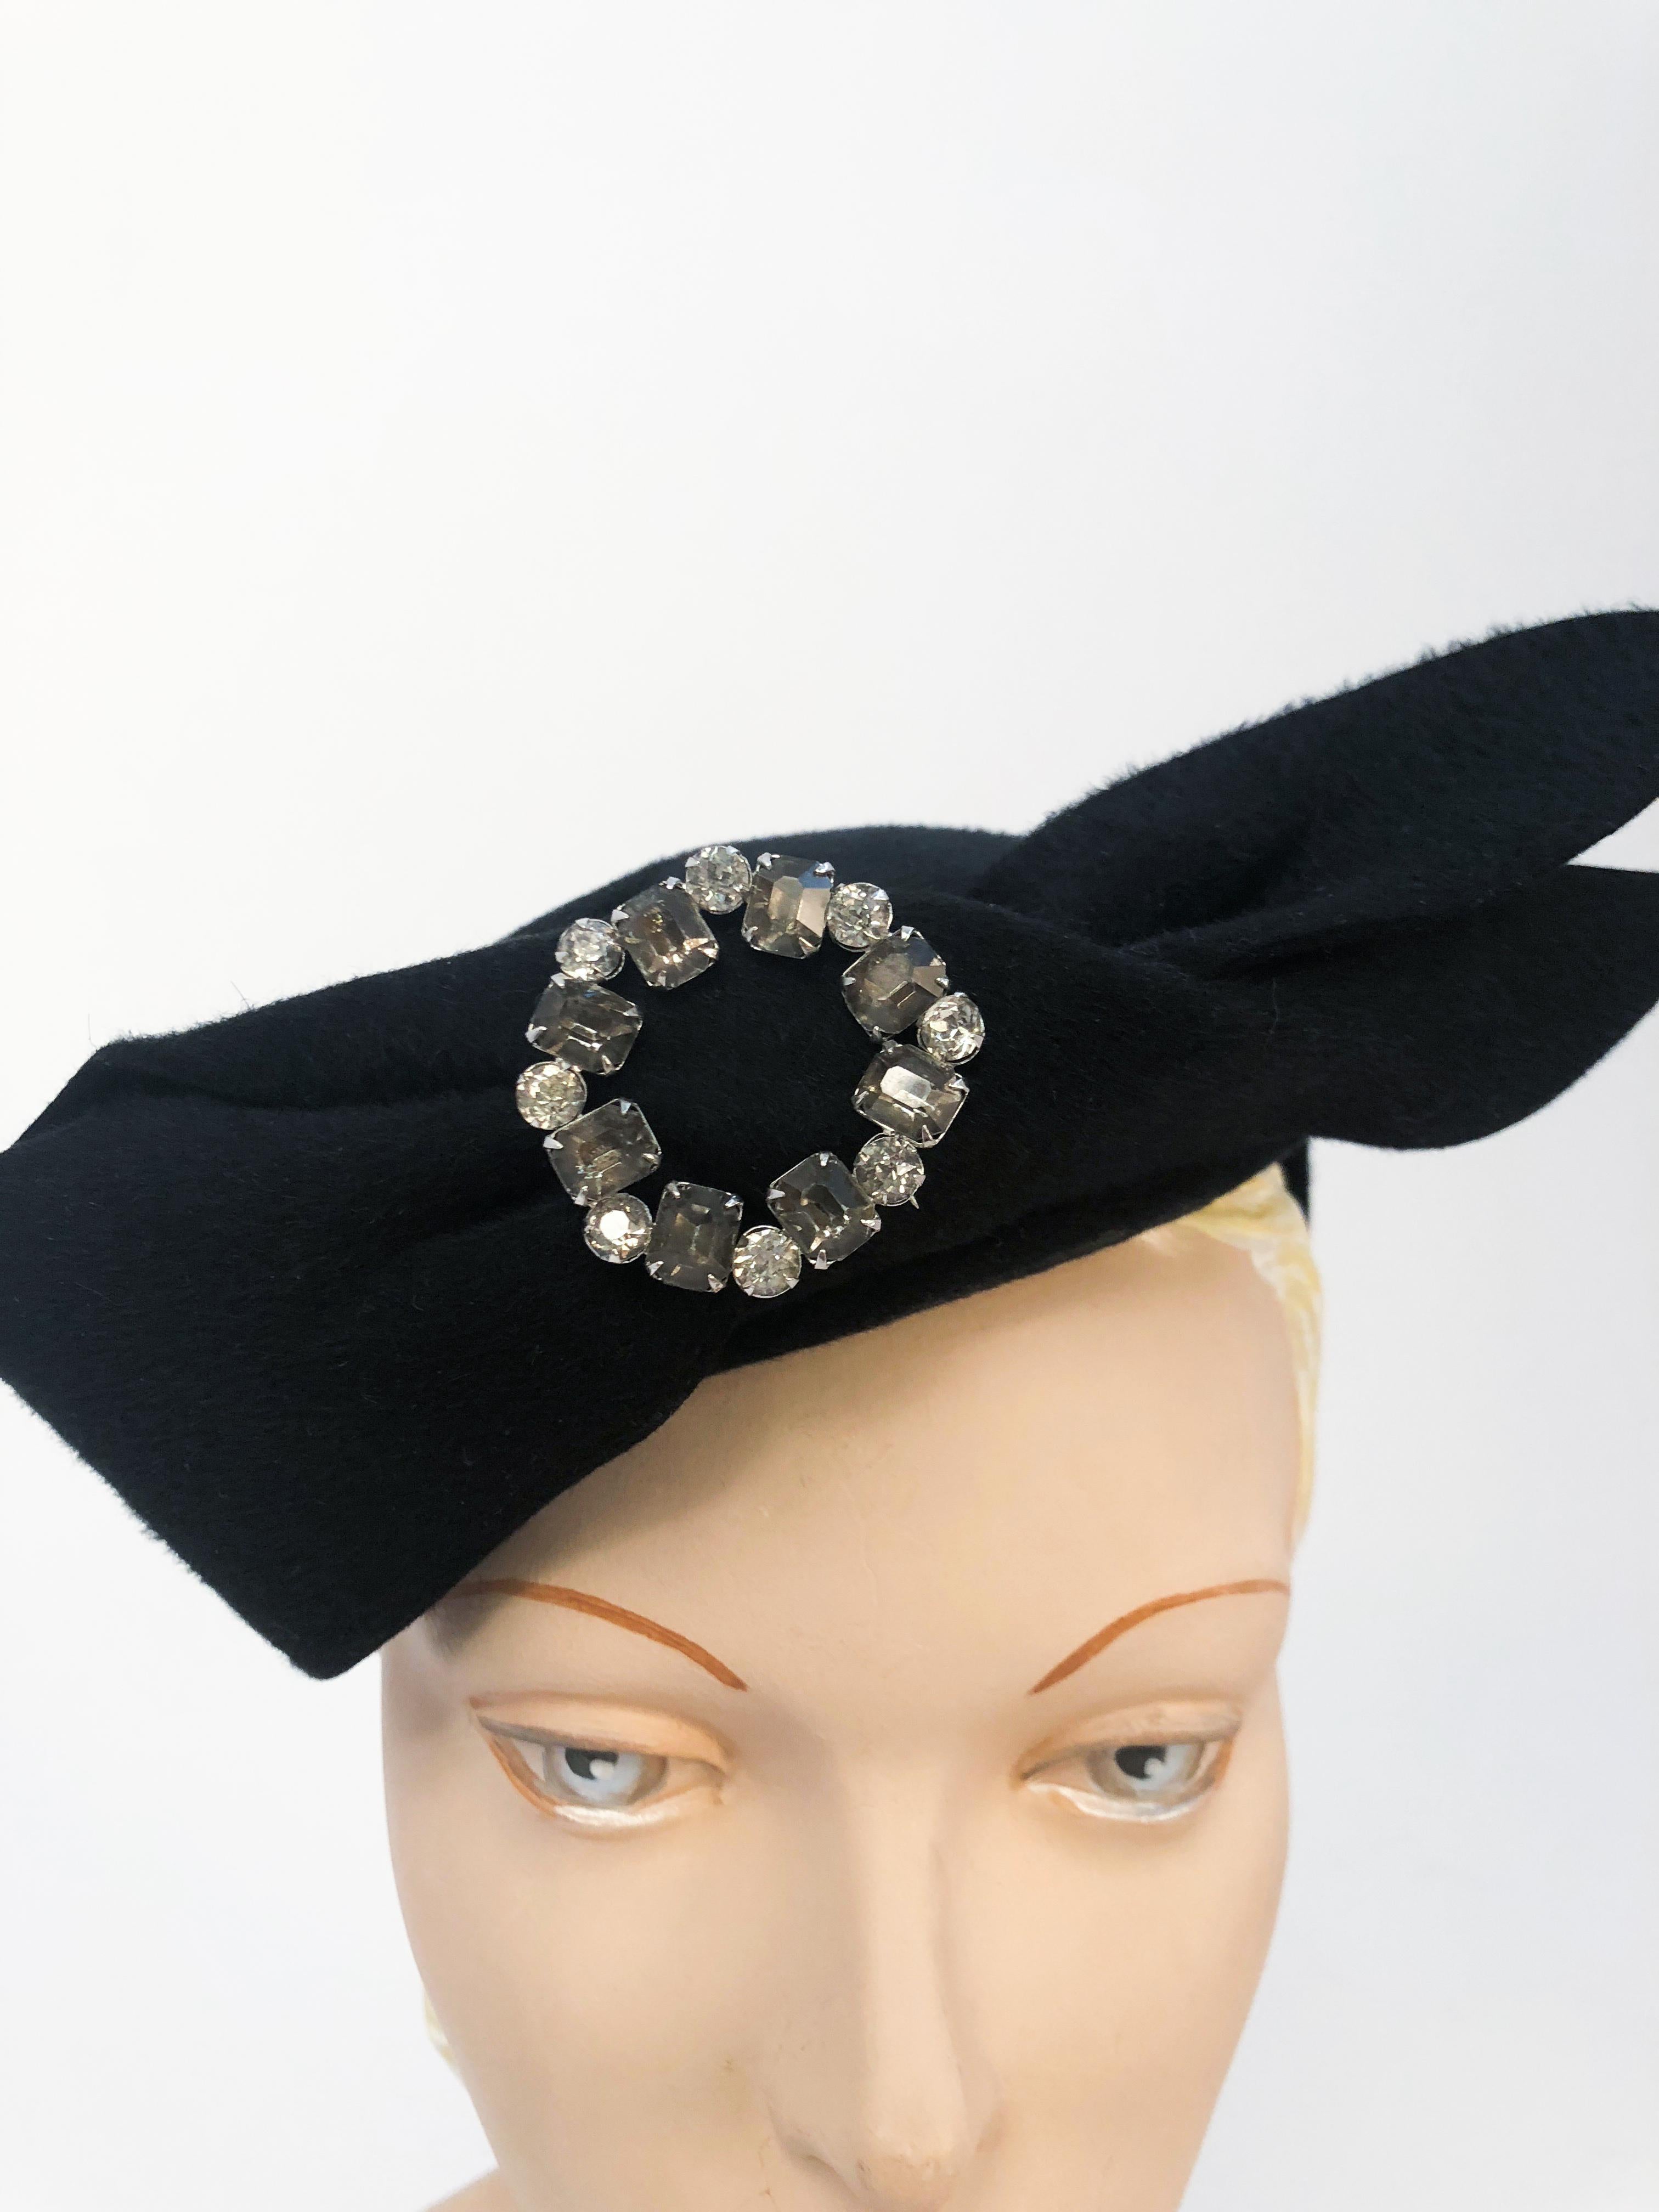 1950s Black Fur Felt Cocktail Hat with Oversized Bow and Rhinestone Accent. Accent features clear and soft grey rhinestones.